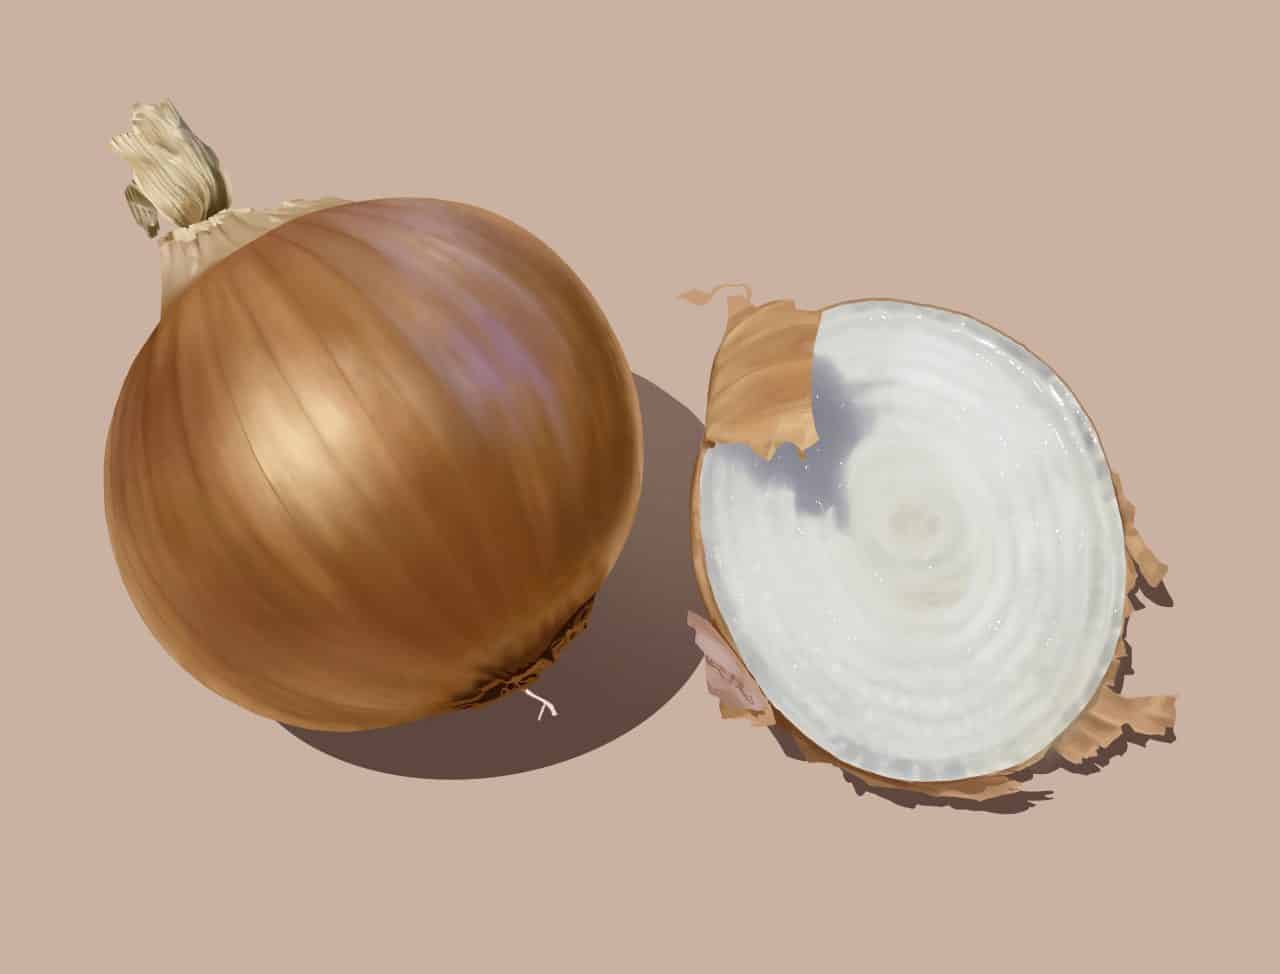 Toronto illustrator Mark Scheibmayr shares tips on how to draw onions.